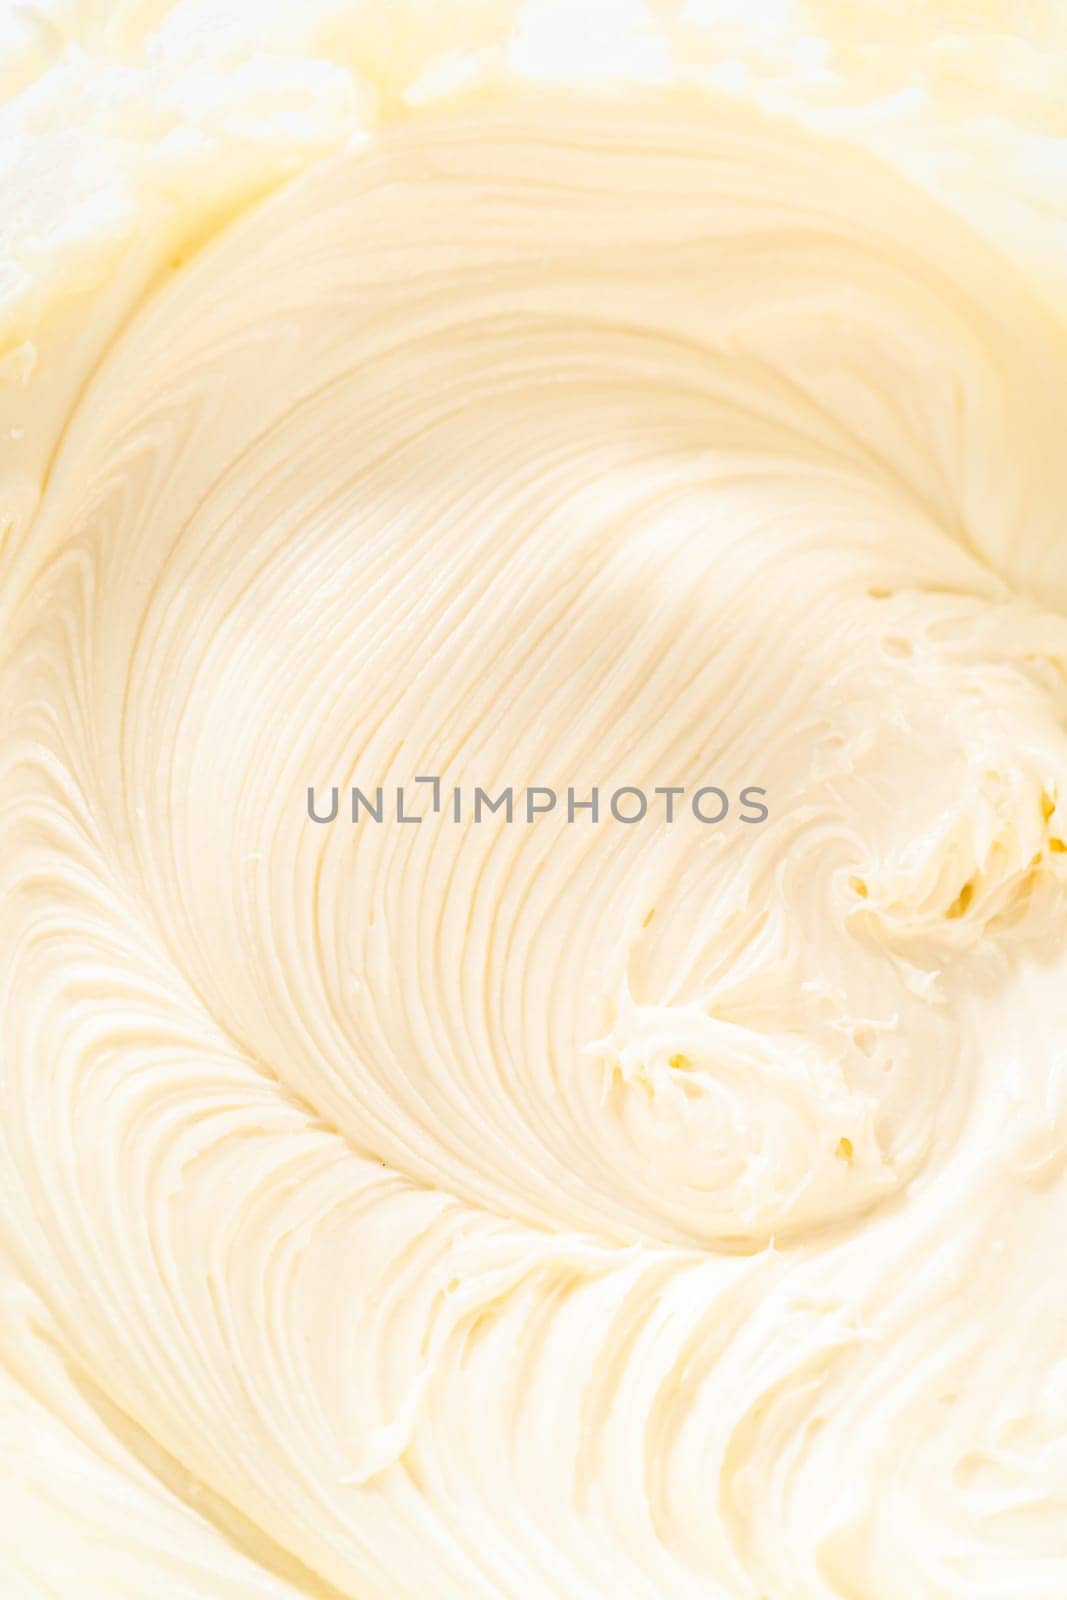 Skillfully combine ingredients using a hand mixer to prepare a rich, smooth cream cheese buttercream frosting, which is perfect for adorning the bundt cake.